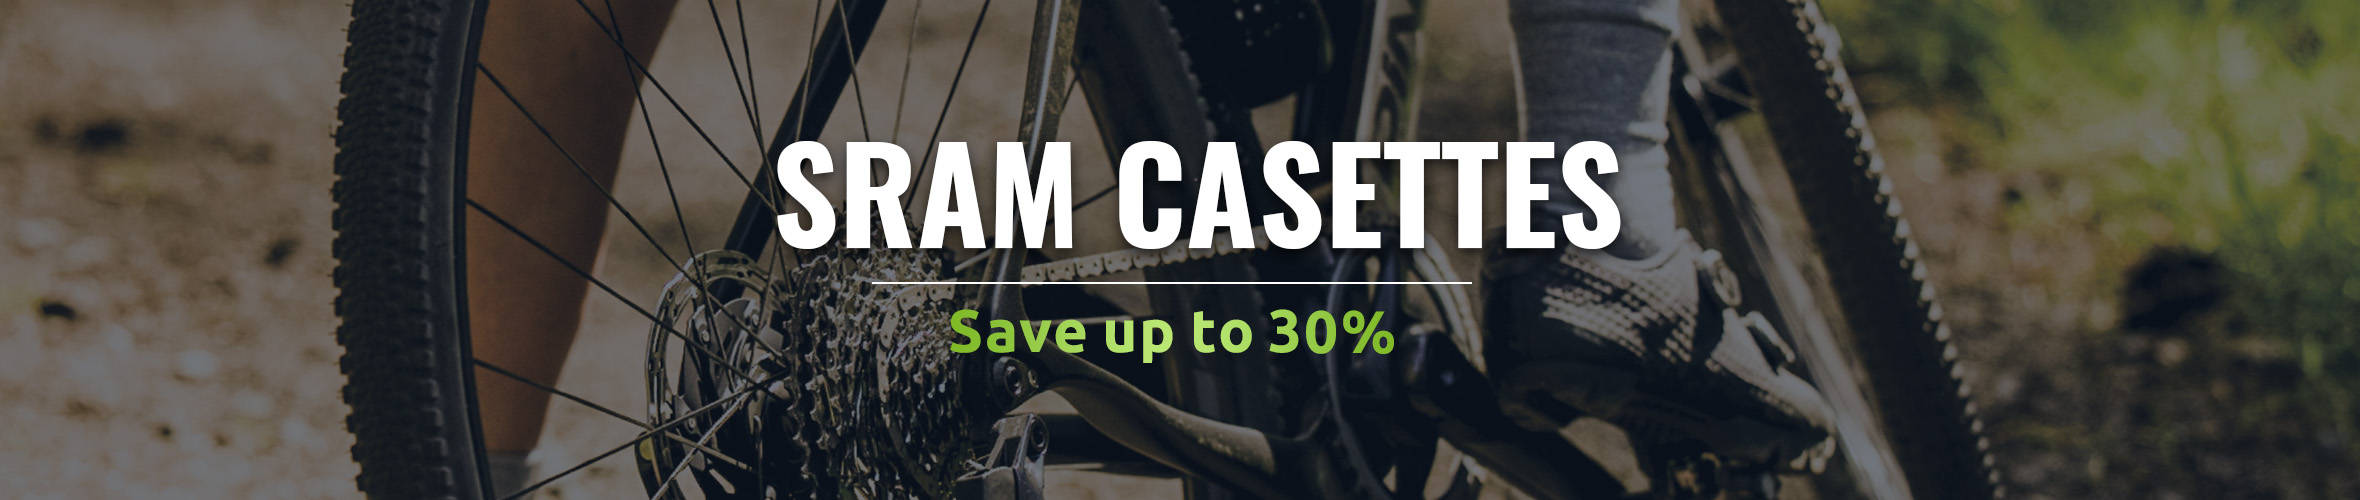 Sram Casettes - Save up to 30%